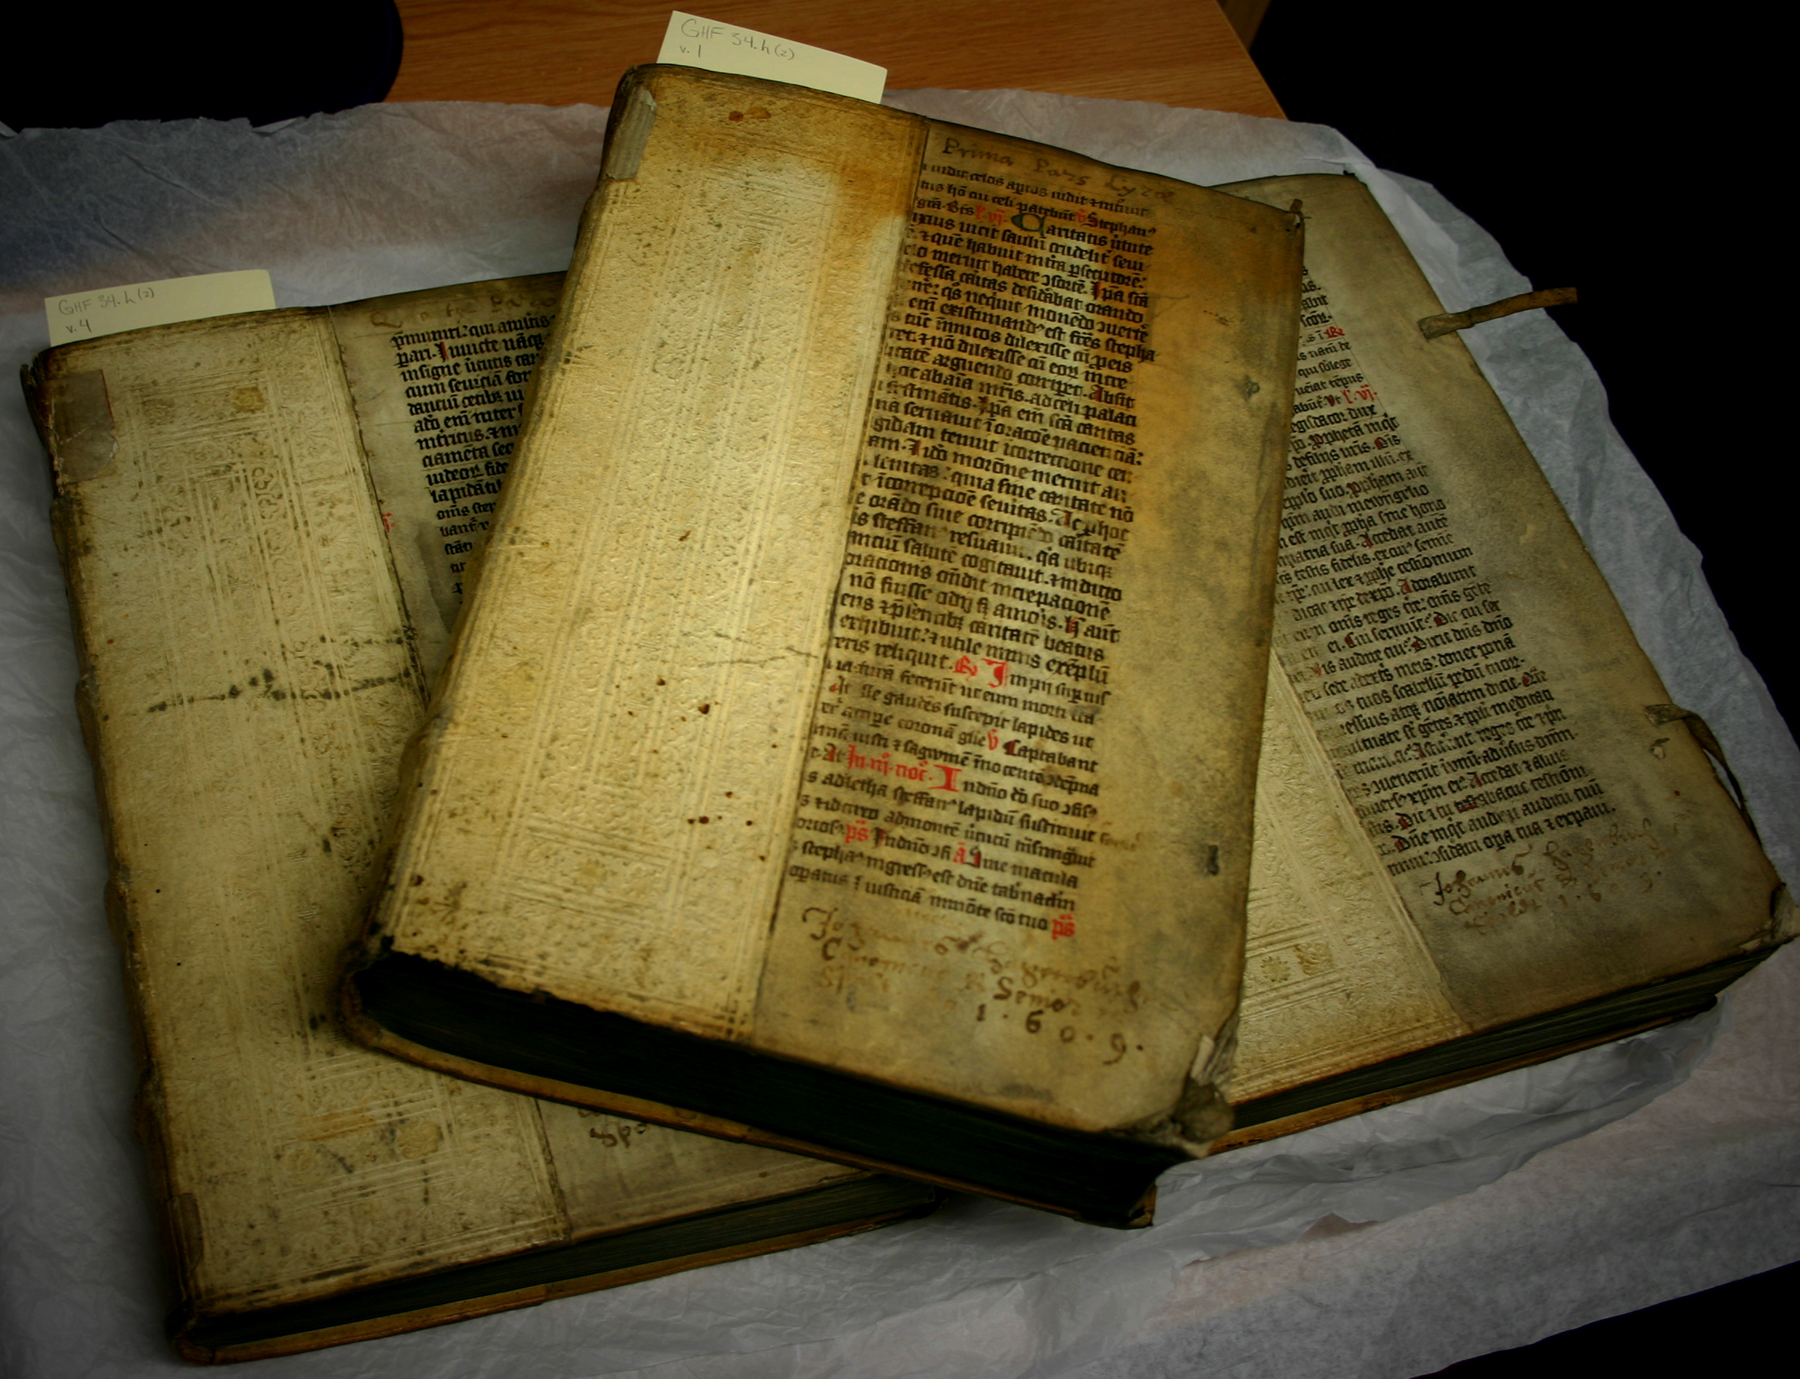 Three volumes from the George Hay Forbes Collection, half bound in 16th century alum tawed pigskin and 14th century manuscript fragments. GHF34.h(2).